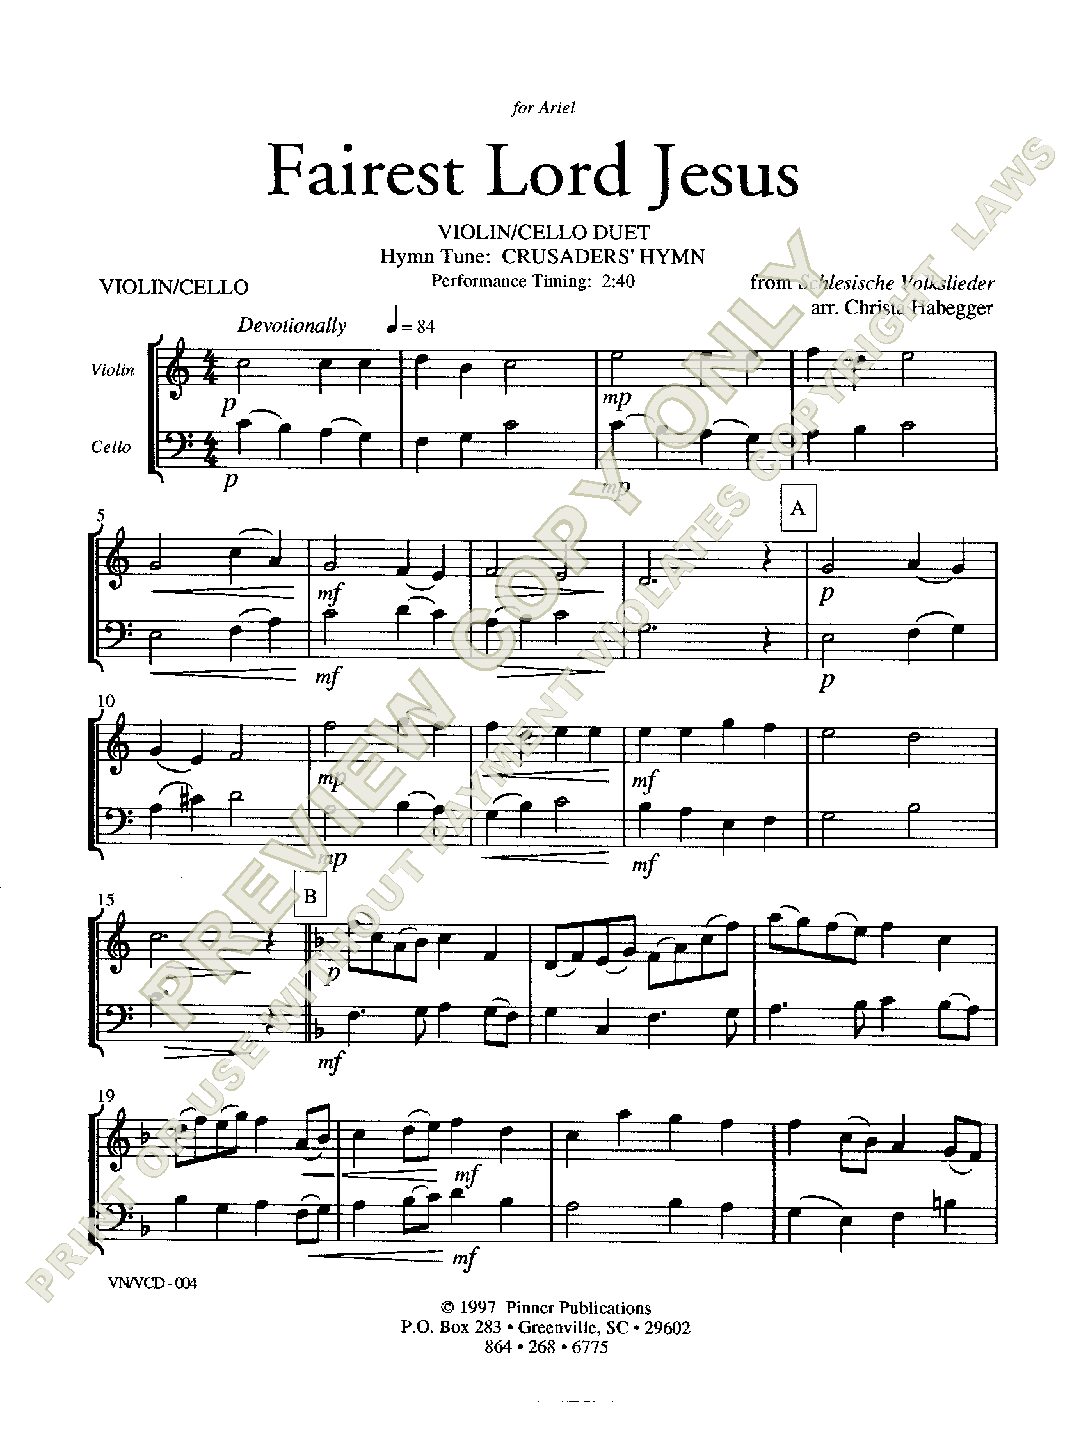 Fairest Lord Jesus (Easy) - [VN/VCD-004]